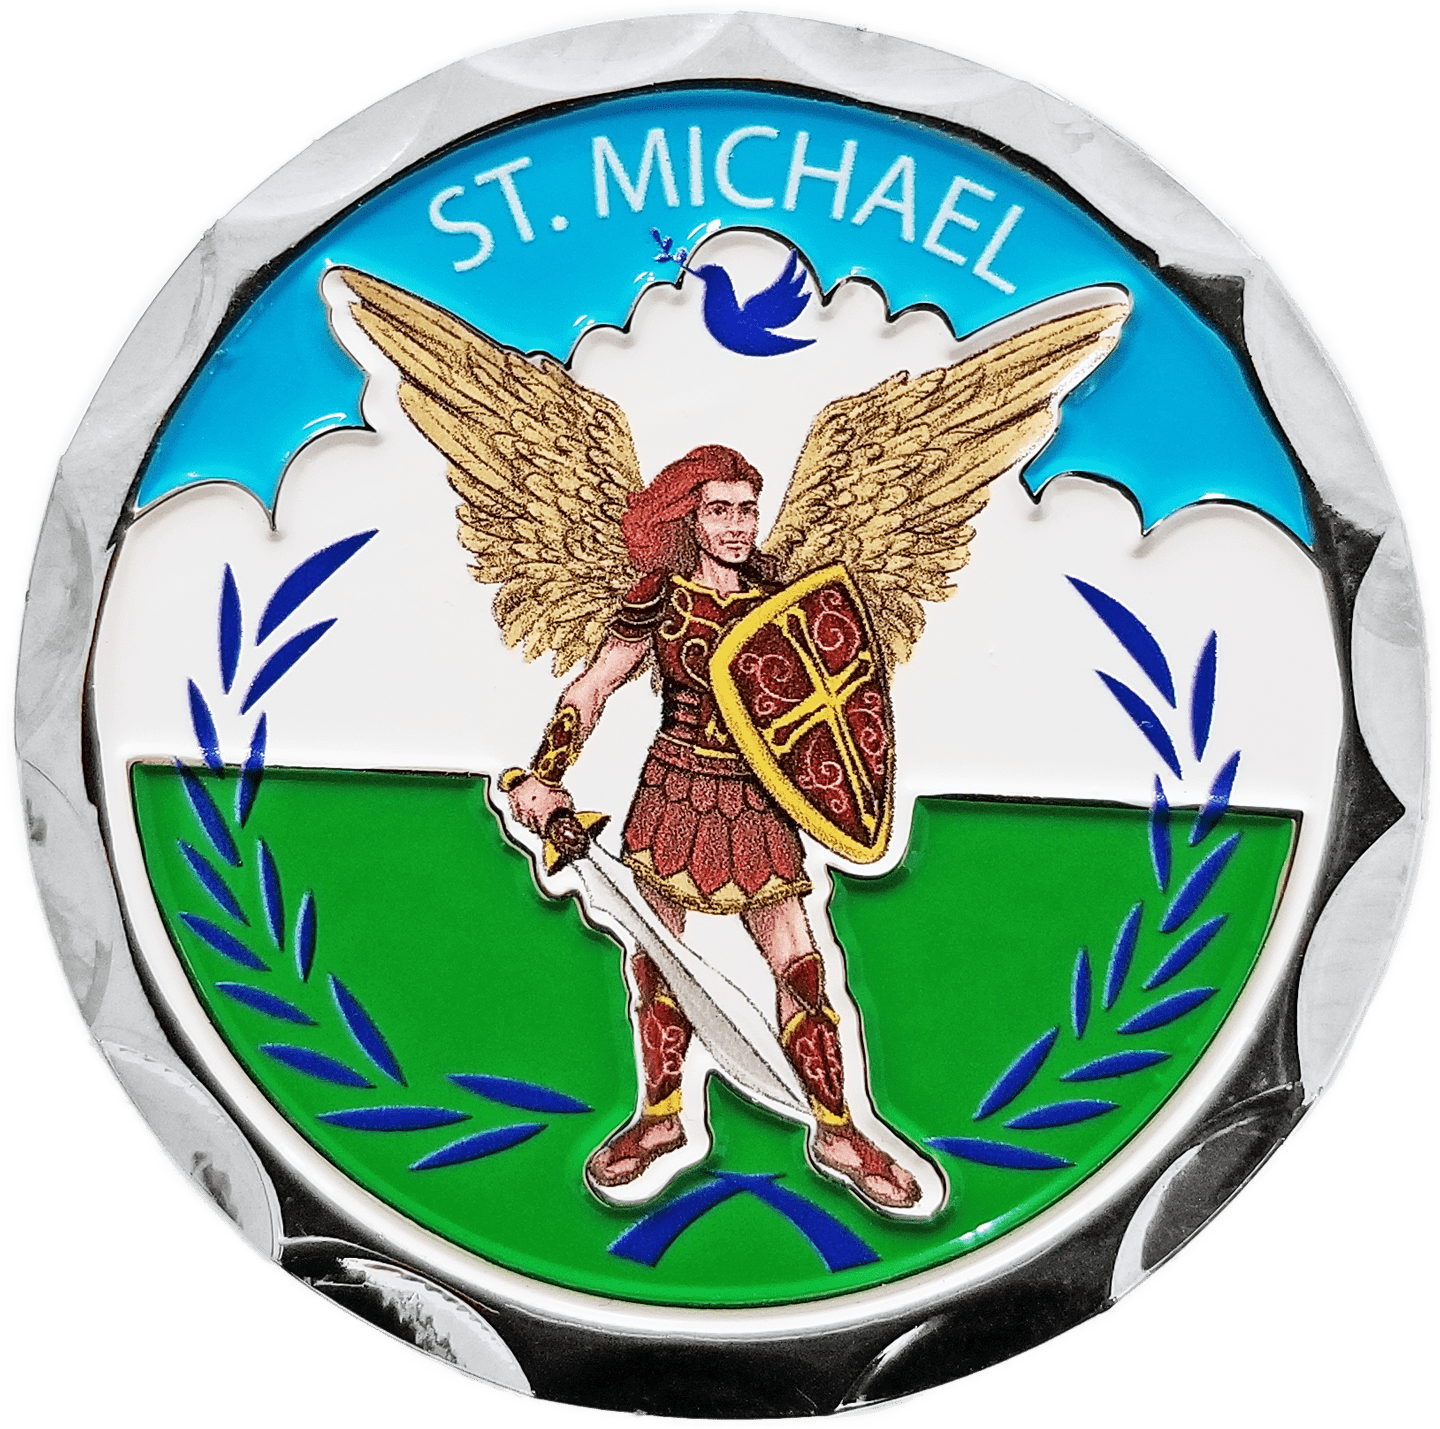 St. Michael Confirmation Coin - Psalm 91:10-11